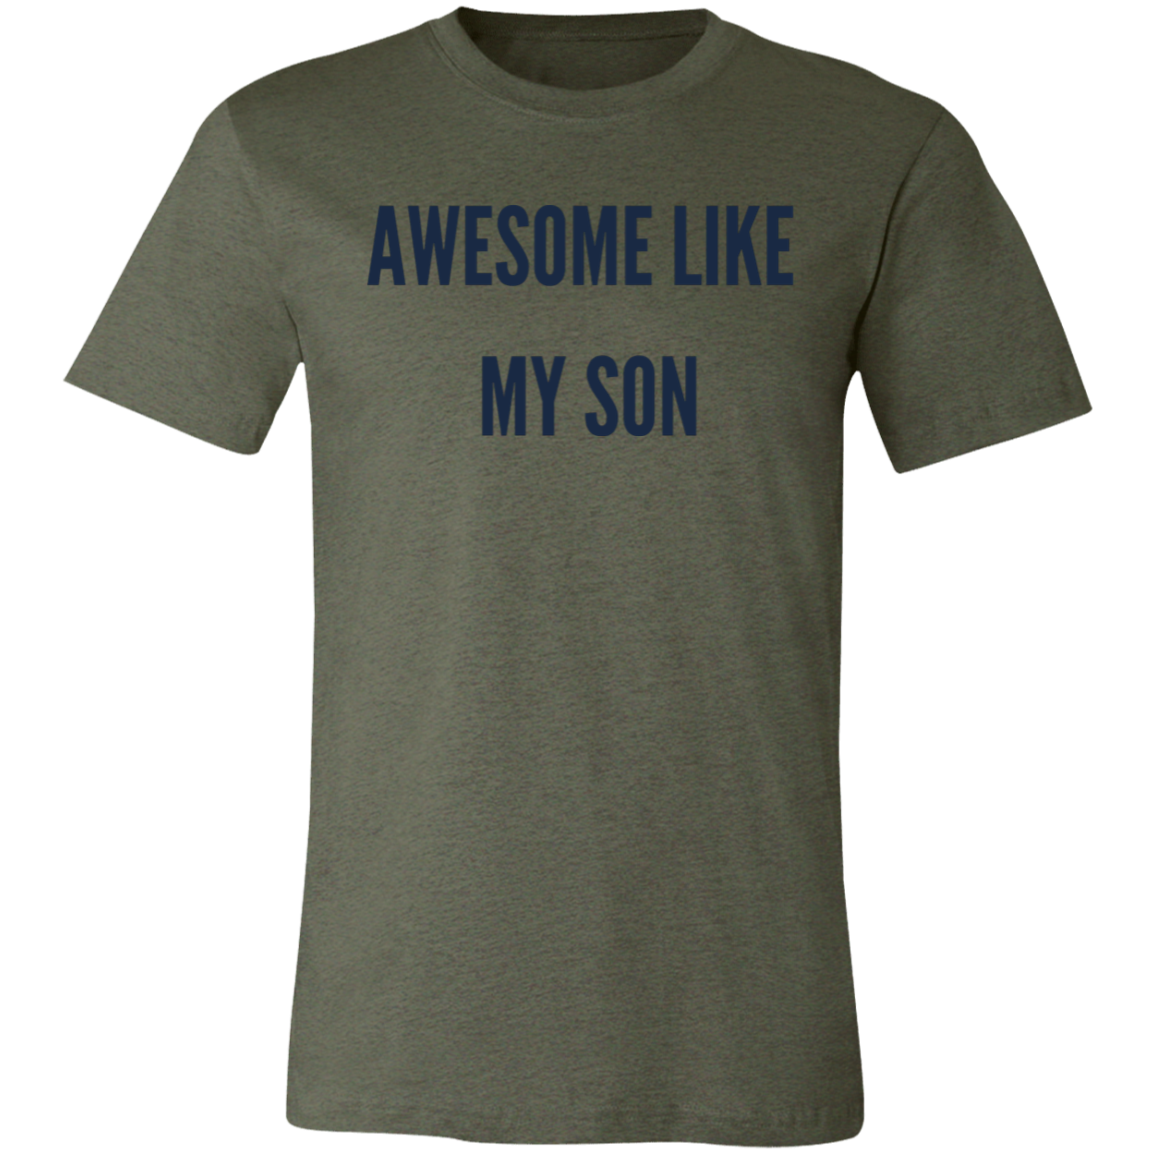 Aweso like My Son on Unisex Jersey Short-Sleeve T-Shirt